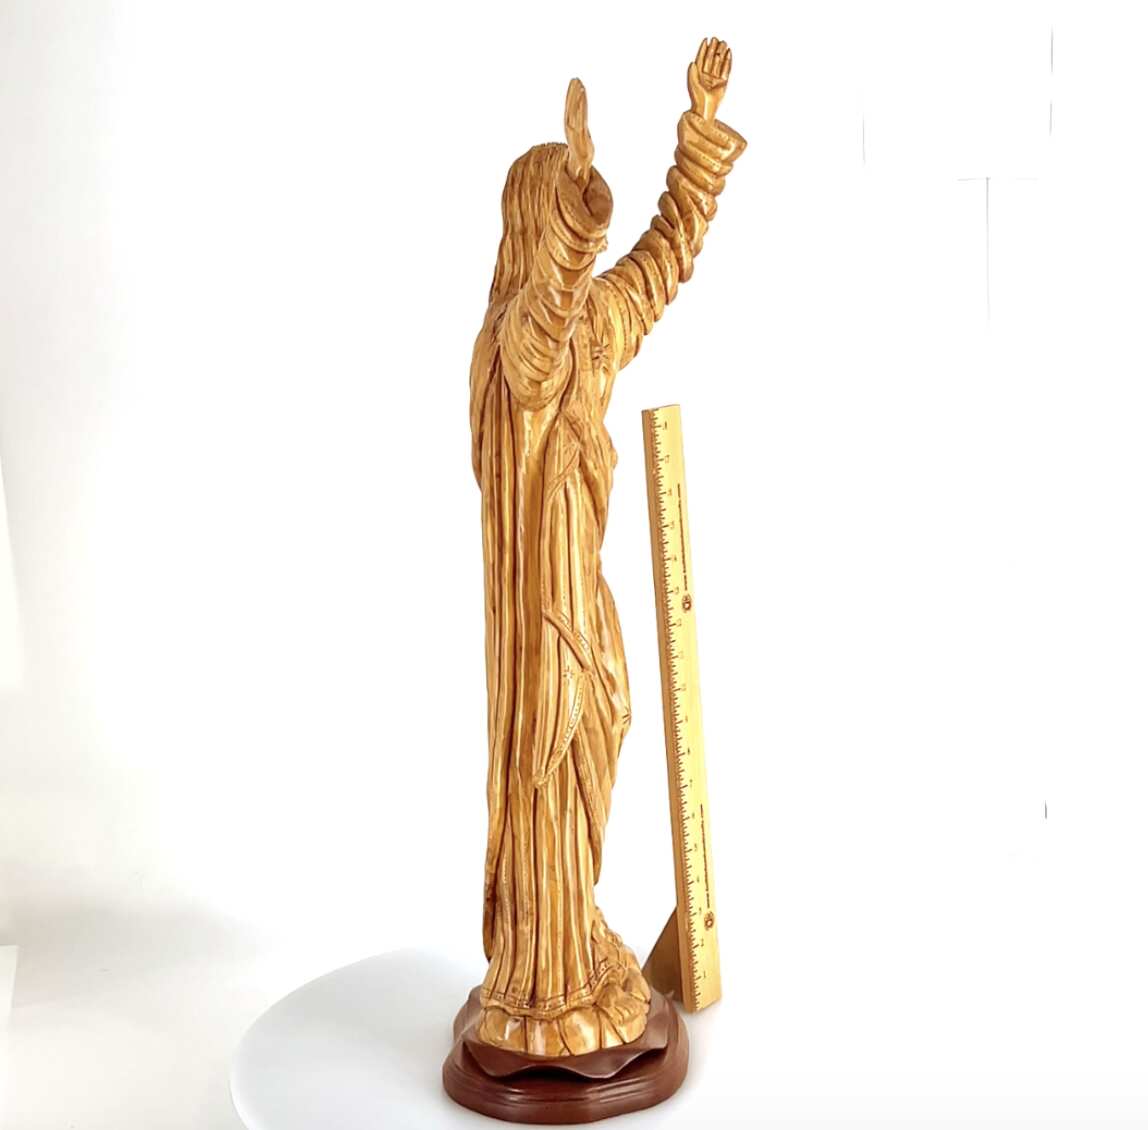 Jesus Christ "Sacred Heart" with Raised Arms Statue, 32.4" Olive Wood Carving from Holy Land